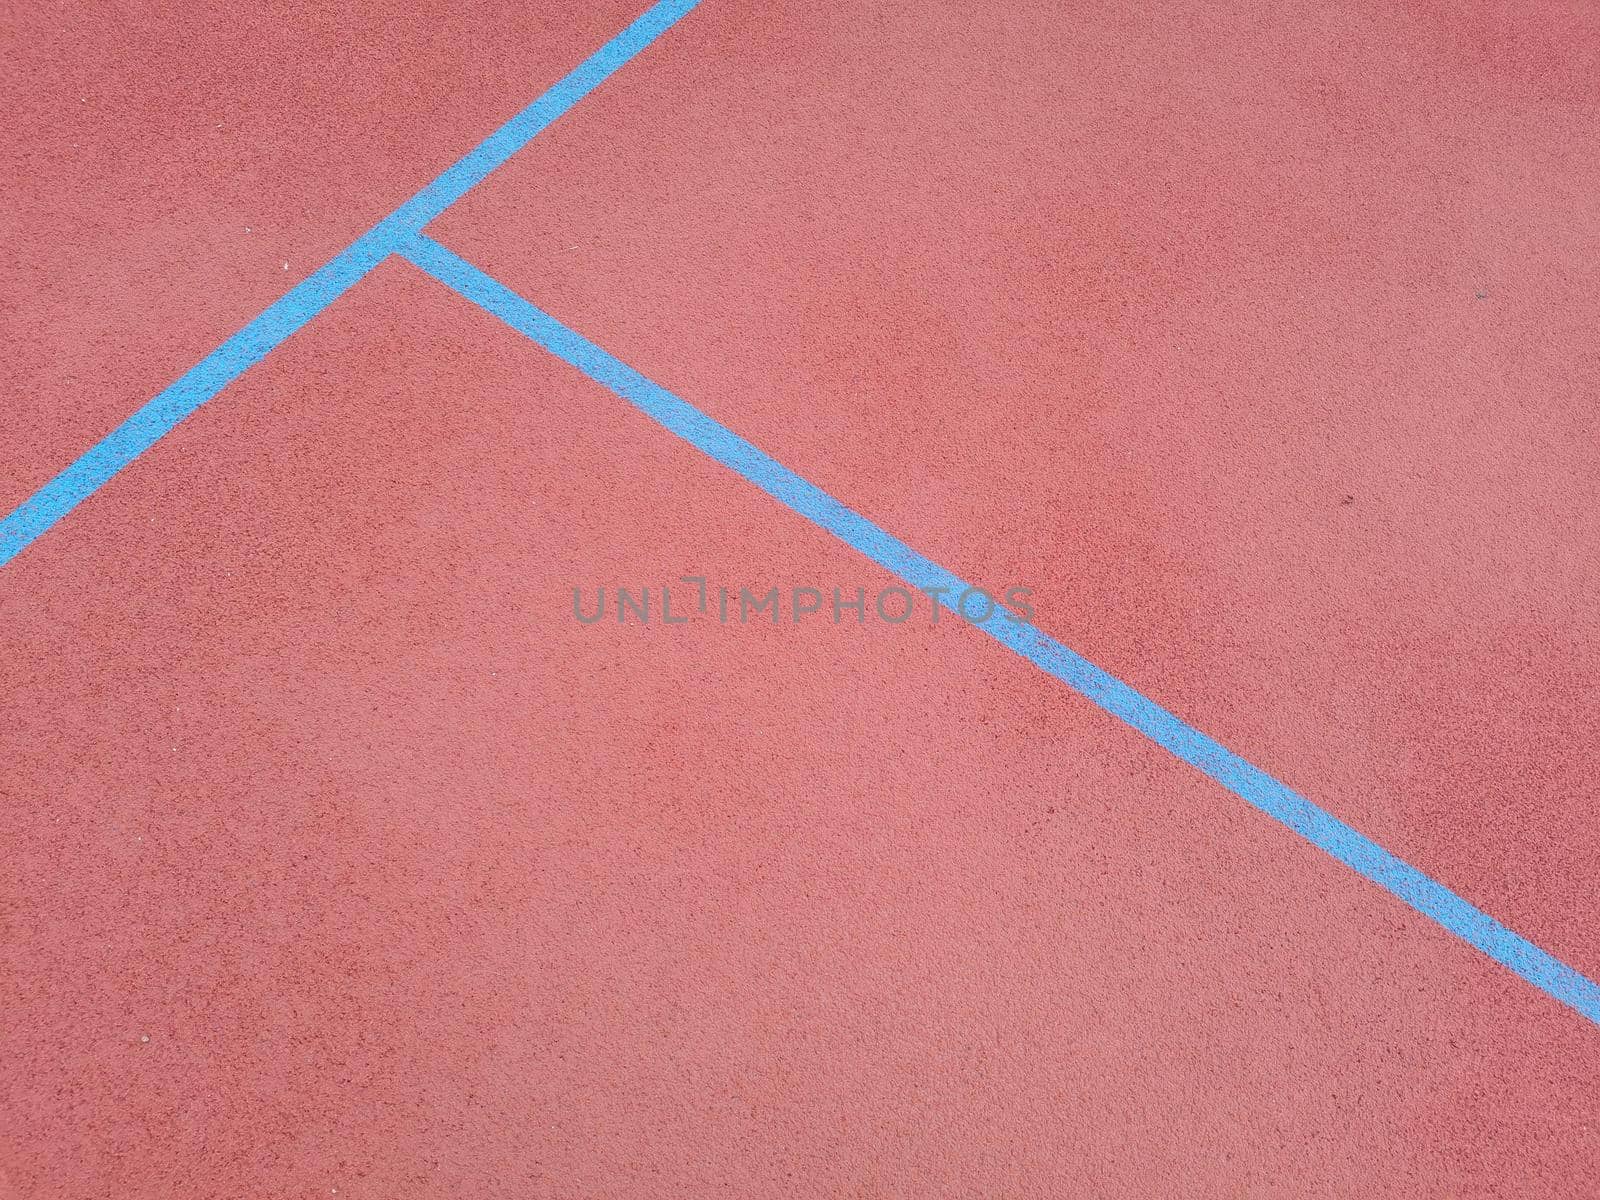 Empty Clay Tennis Court and marking